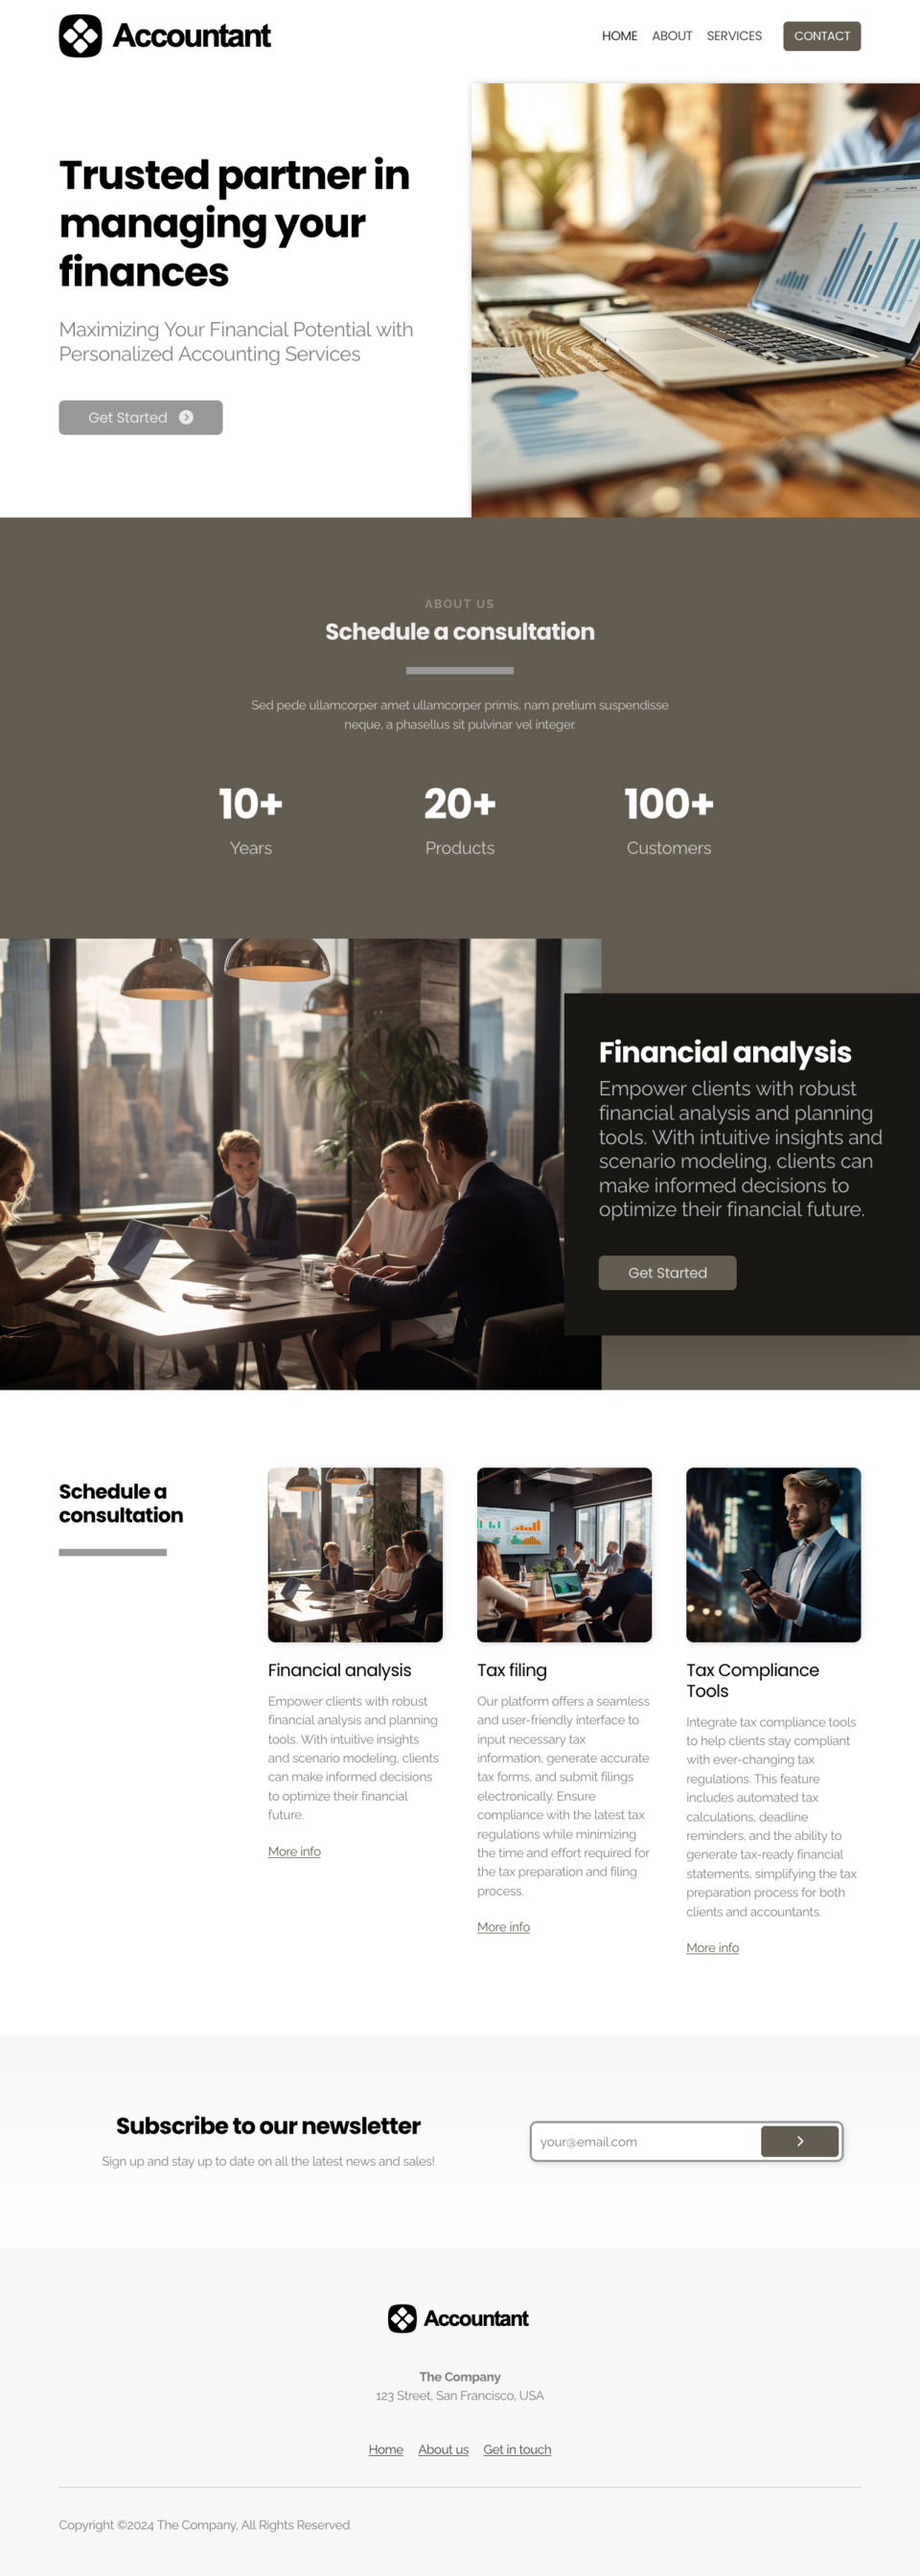 Accountant Website Template - Ideal for accounting professionals, bookkeepers, financial service providers, CPAs, CFOs, and small business owners looking to showcase their financial services online.